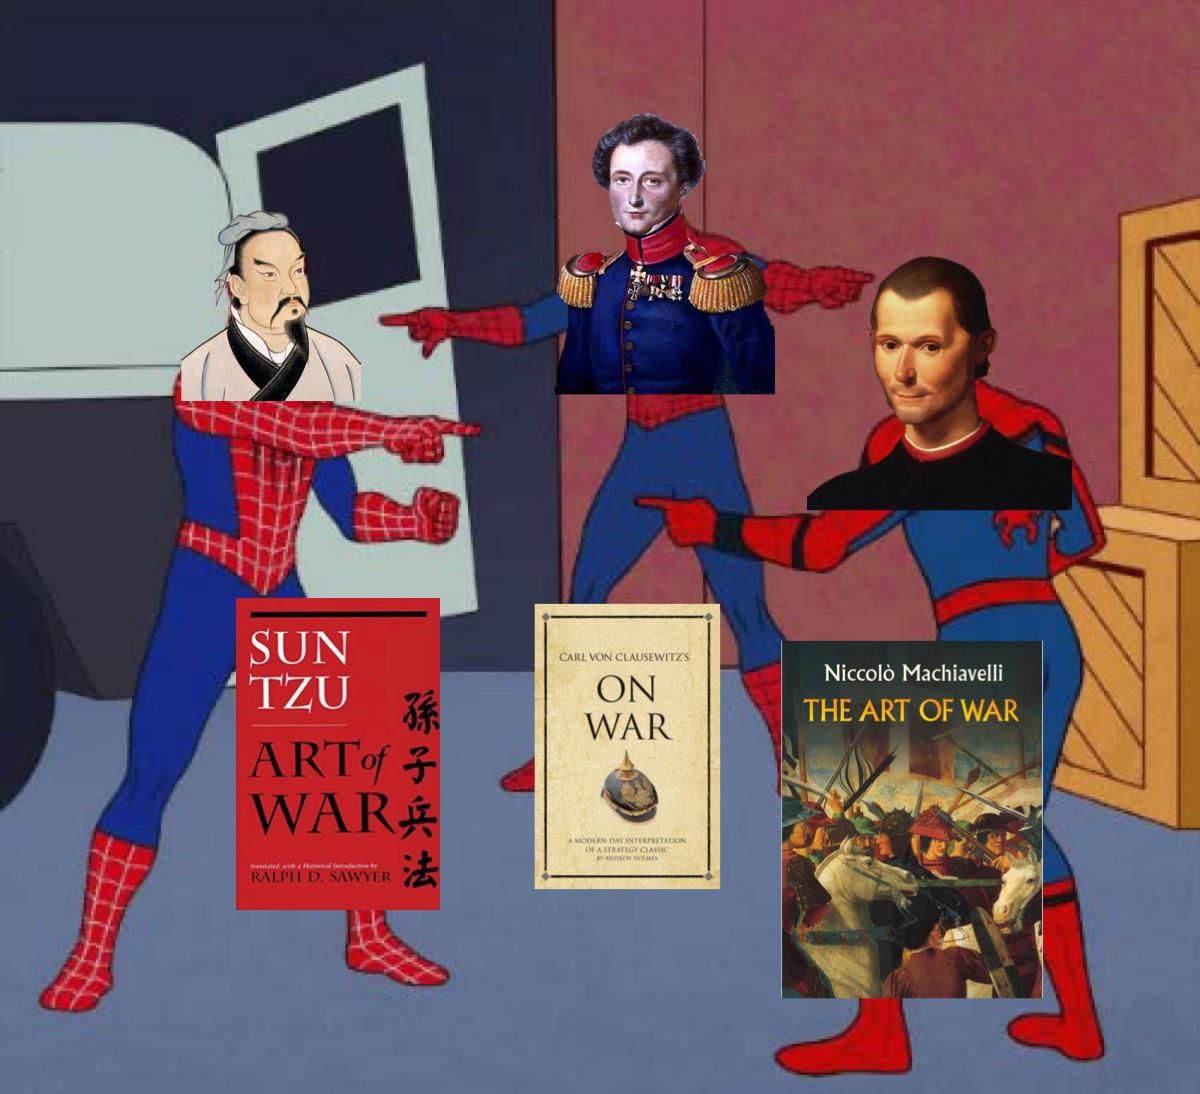 How many books about war and art are there?